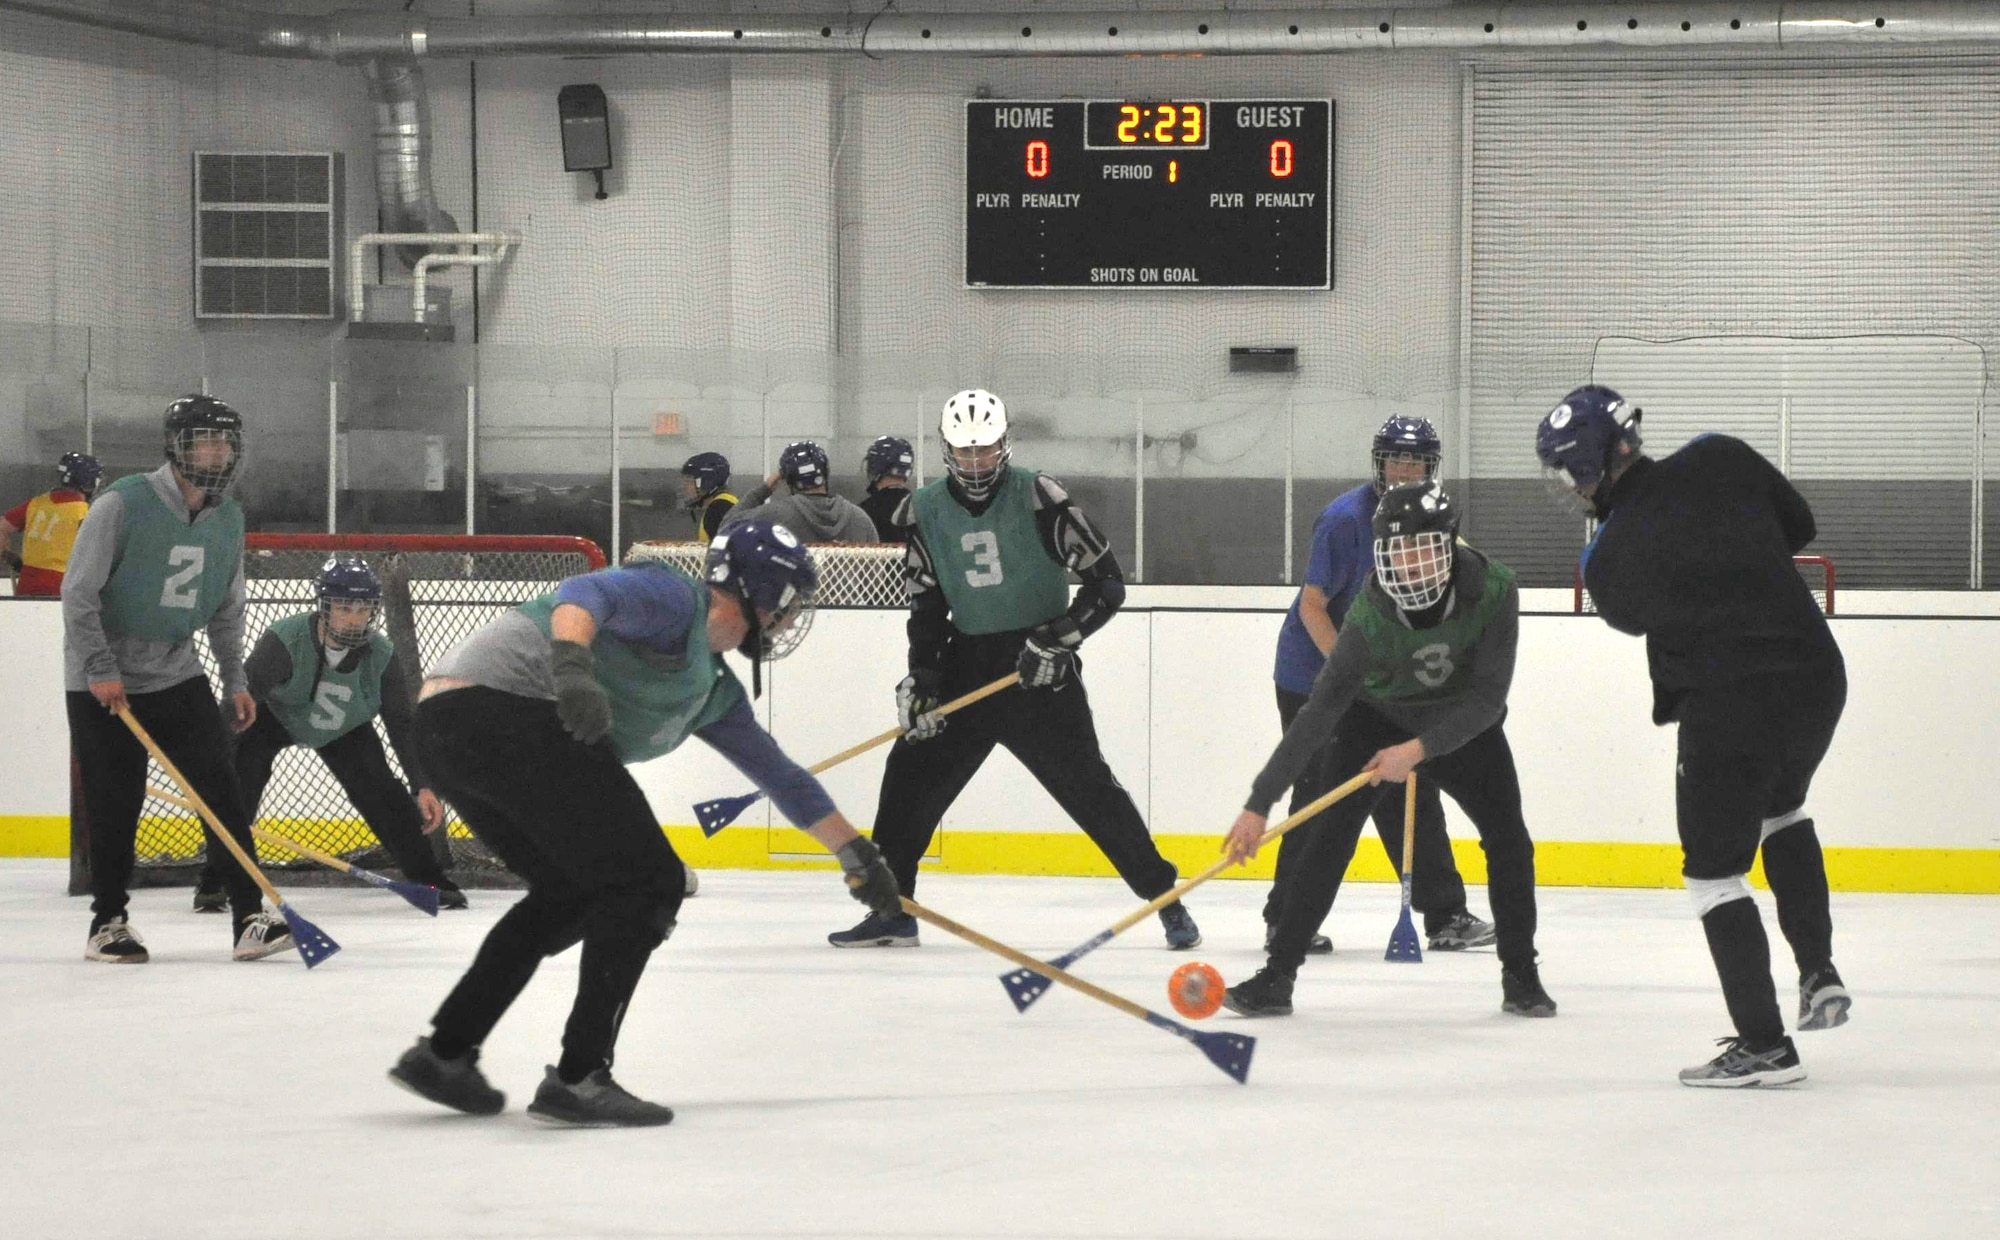 Members of the 38th Reconnaissance Squadron fight for the ball during a game of Broomball June 21, 2019, at Grover Ice Rink, Omaha, Nebraska. The squadron participated in this unit cohesion event funded by the Unite Program. The program is the vision of Gen. David L. Goldfein, Air Force chief of staff, who recognized the need to take care of our squadrons by allowing units to focus on resiliency and cohesion for its members.